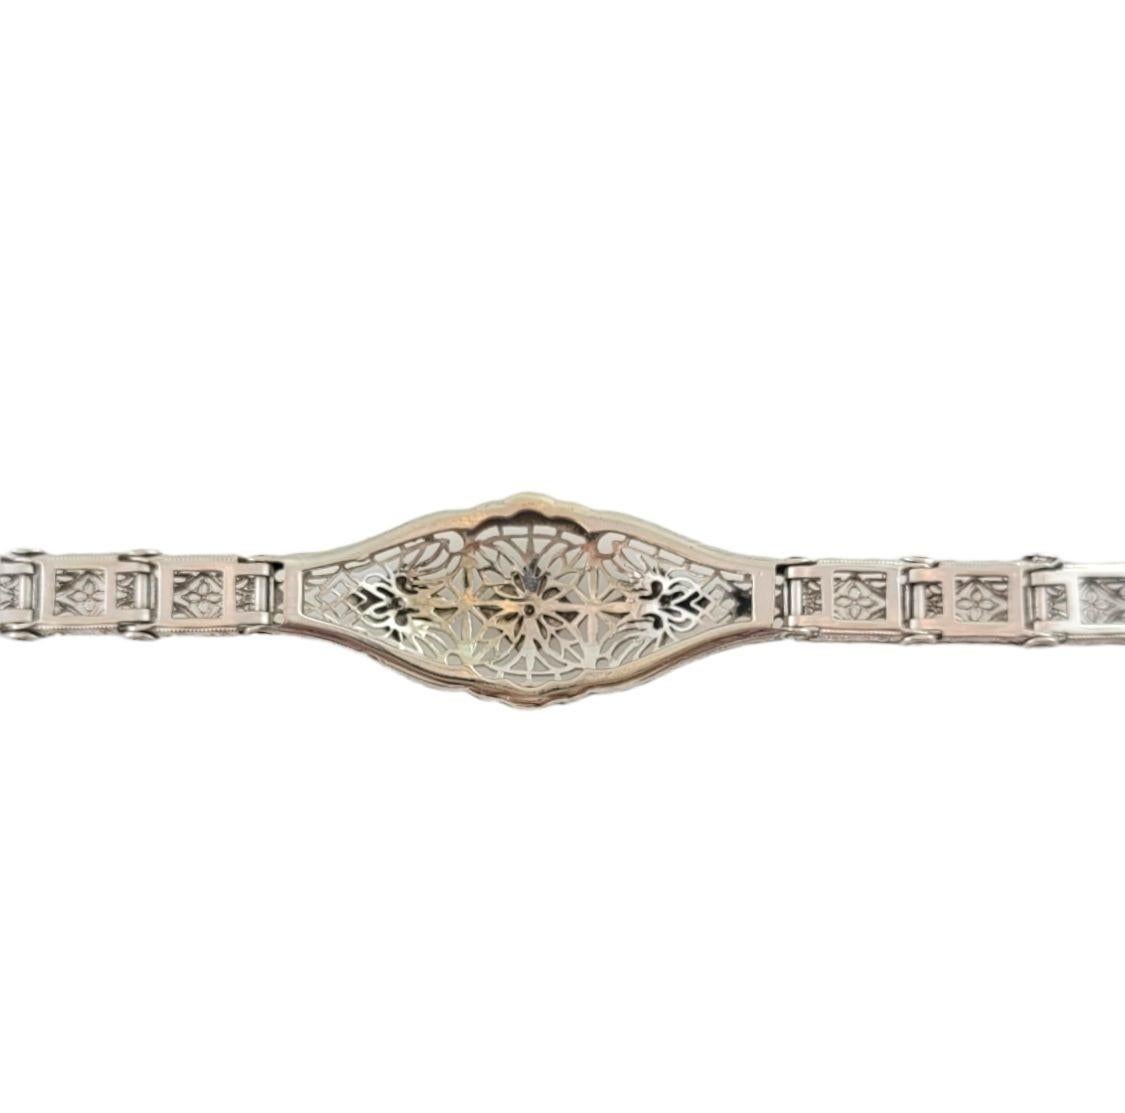 This elegant bracelet features two round single cut diamonds set in beautifully detailed 10K white gold filigree. Width: 10 mm.

Approximate total diamond weight: .04 ct.

Diamond color: I

Diamond clarity: I1

Ring Size:  6.5 inches

Weight:  7.3